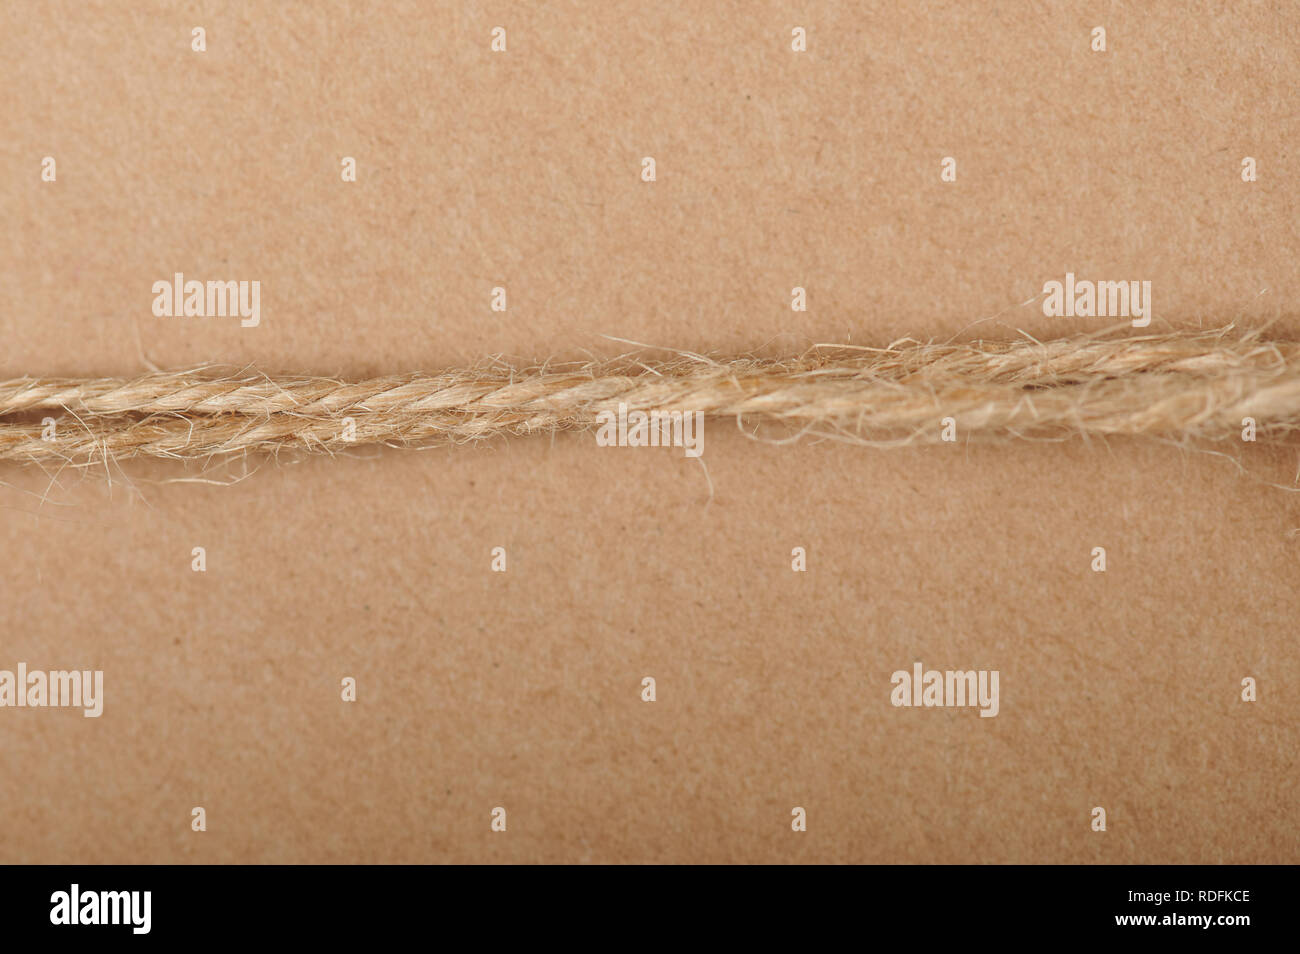 String brown rope close up view on brown paper background Stock Photo